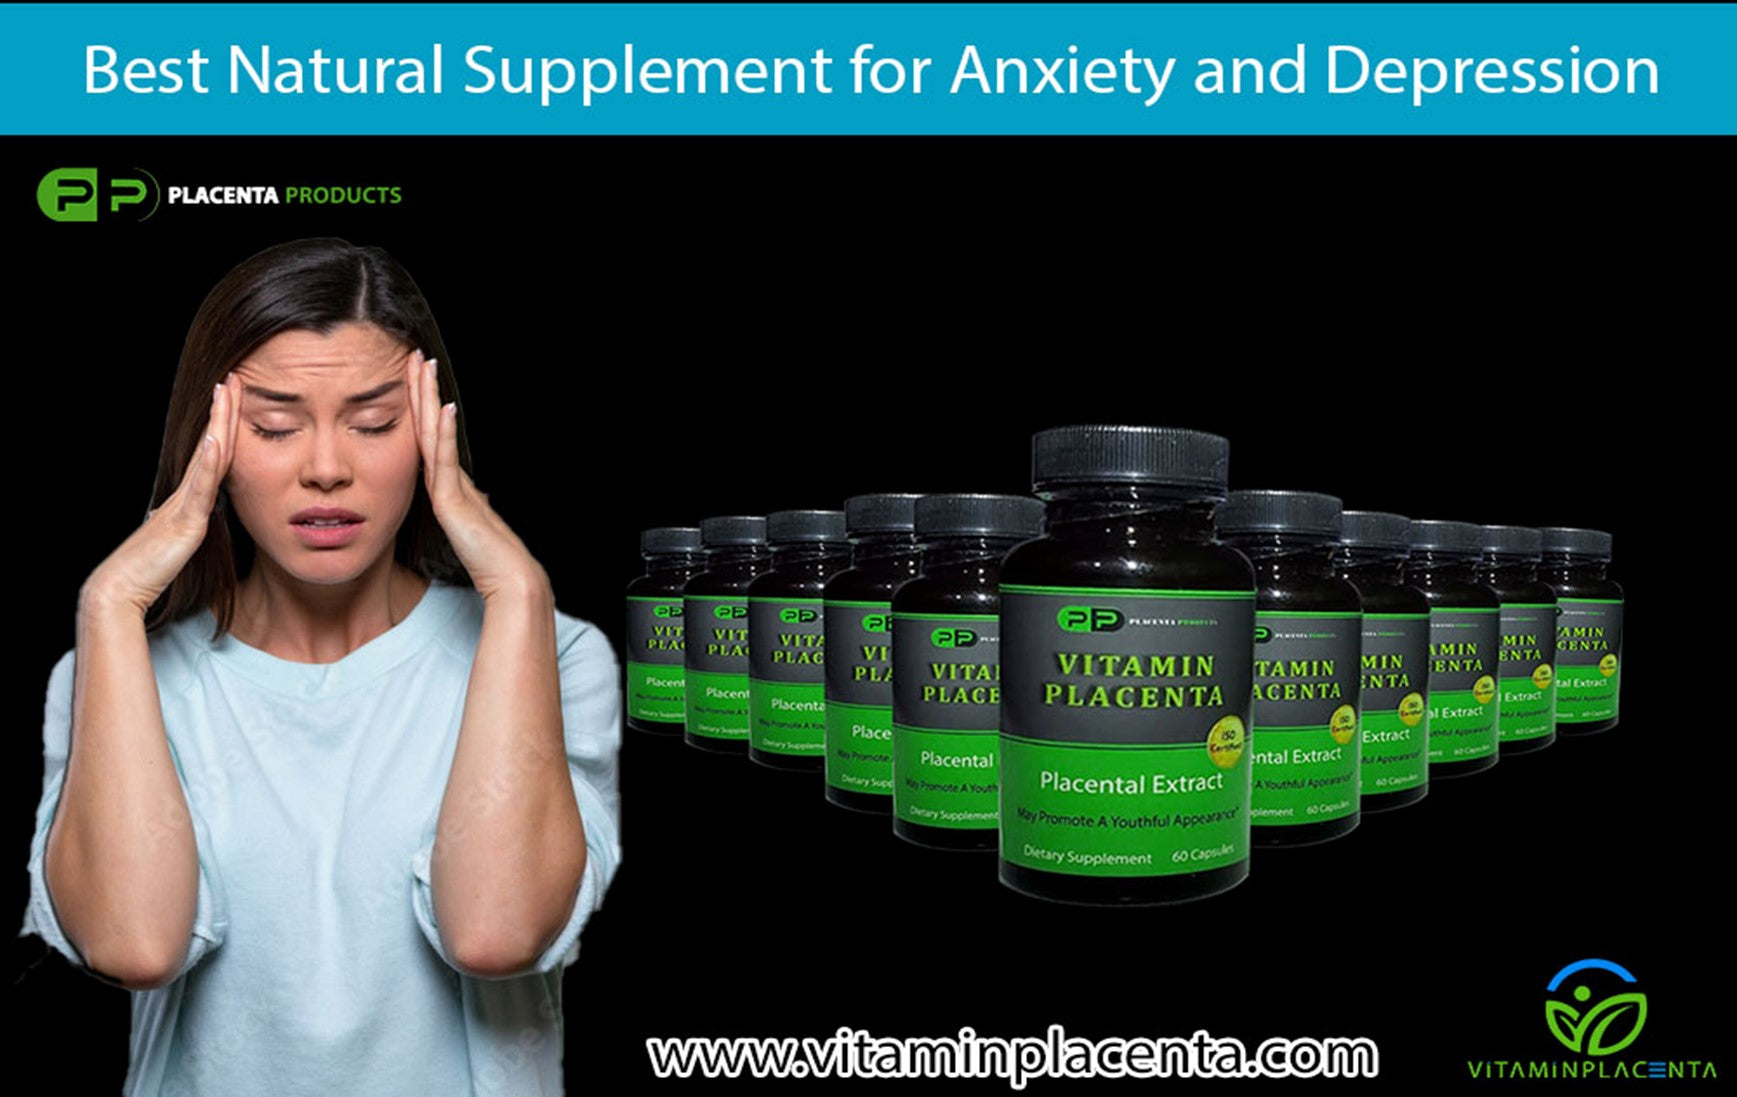 Best Natural Supplement for Anxiety and Depression